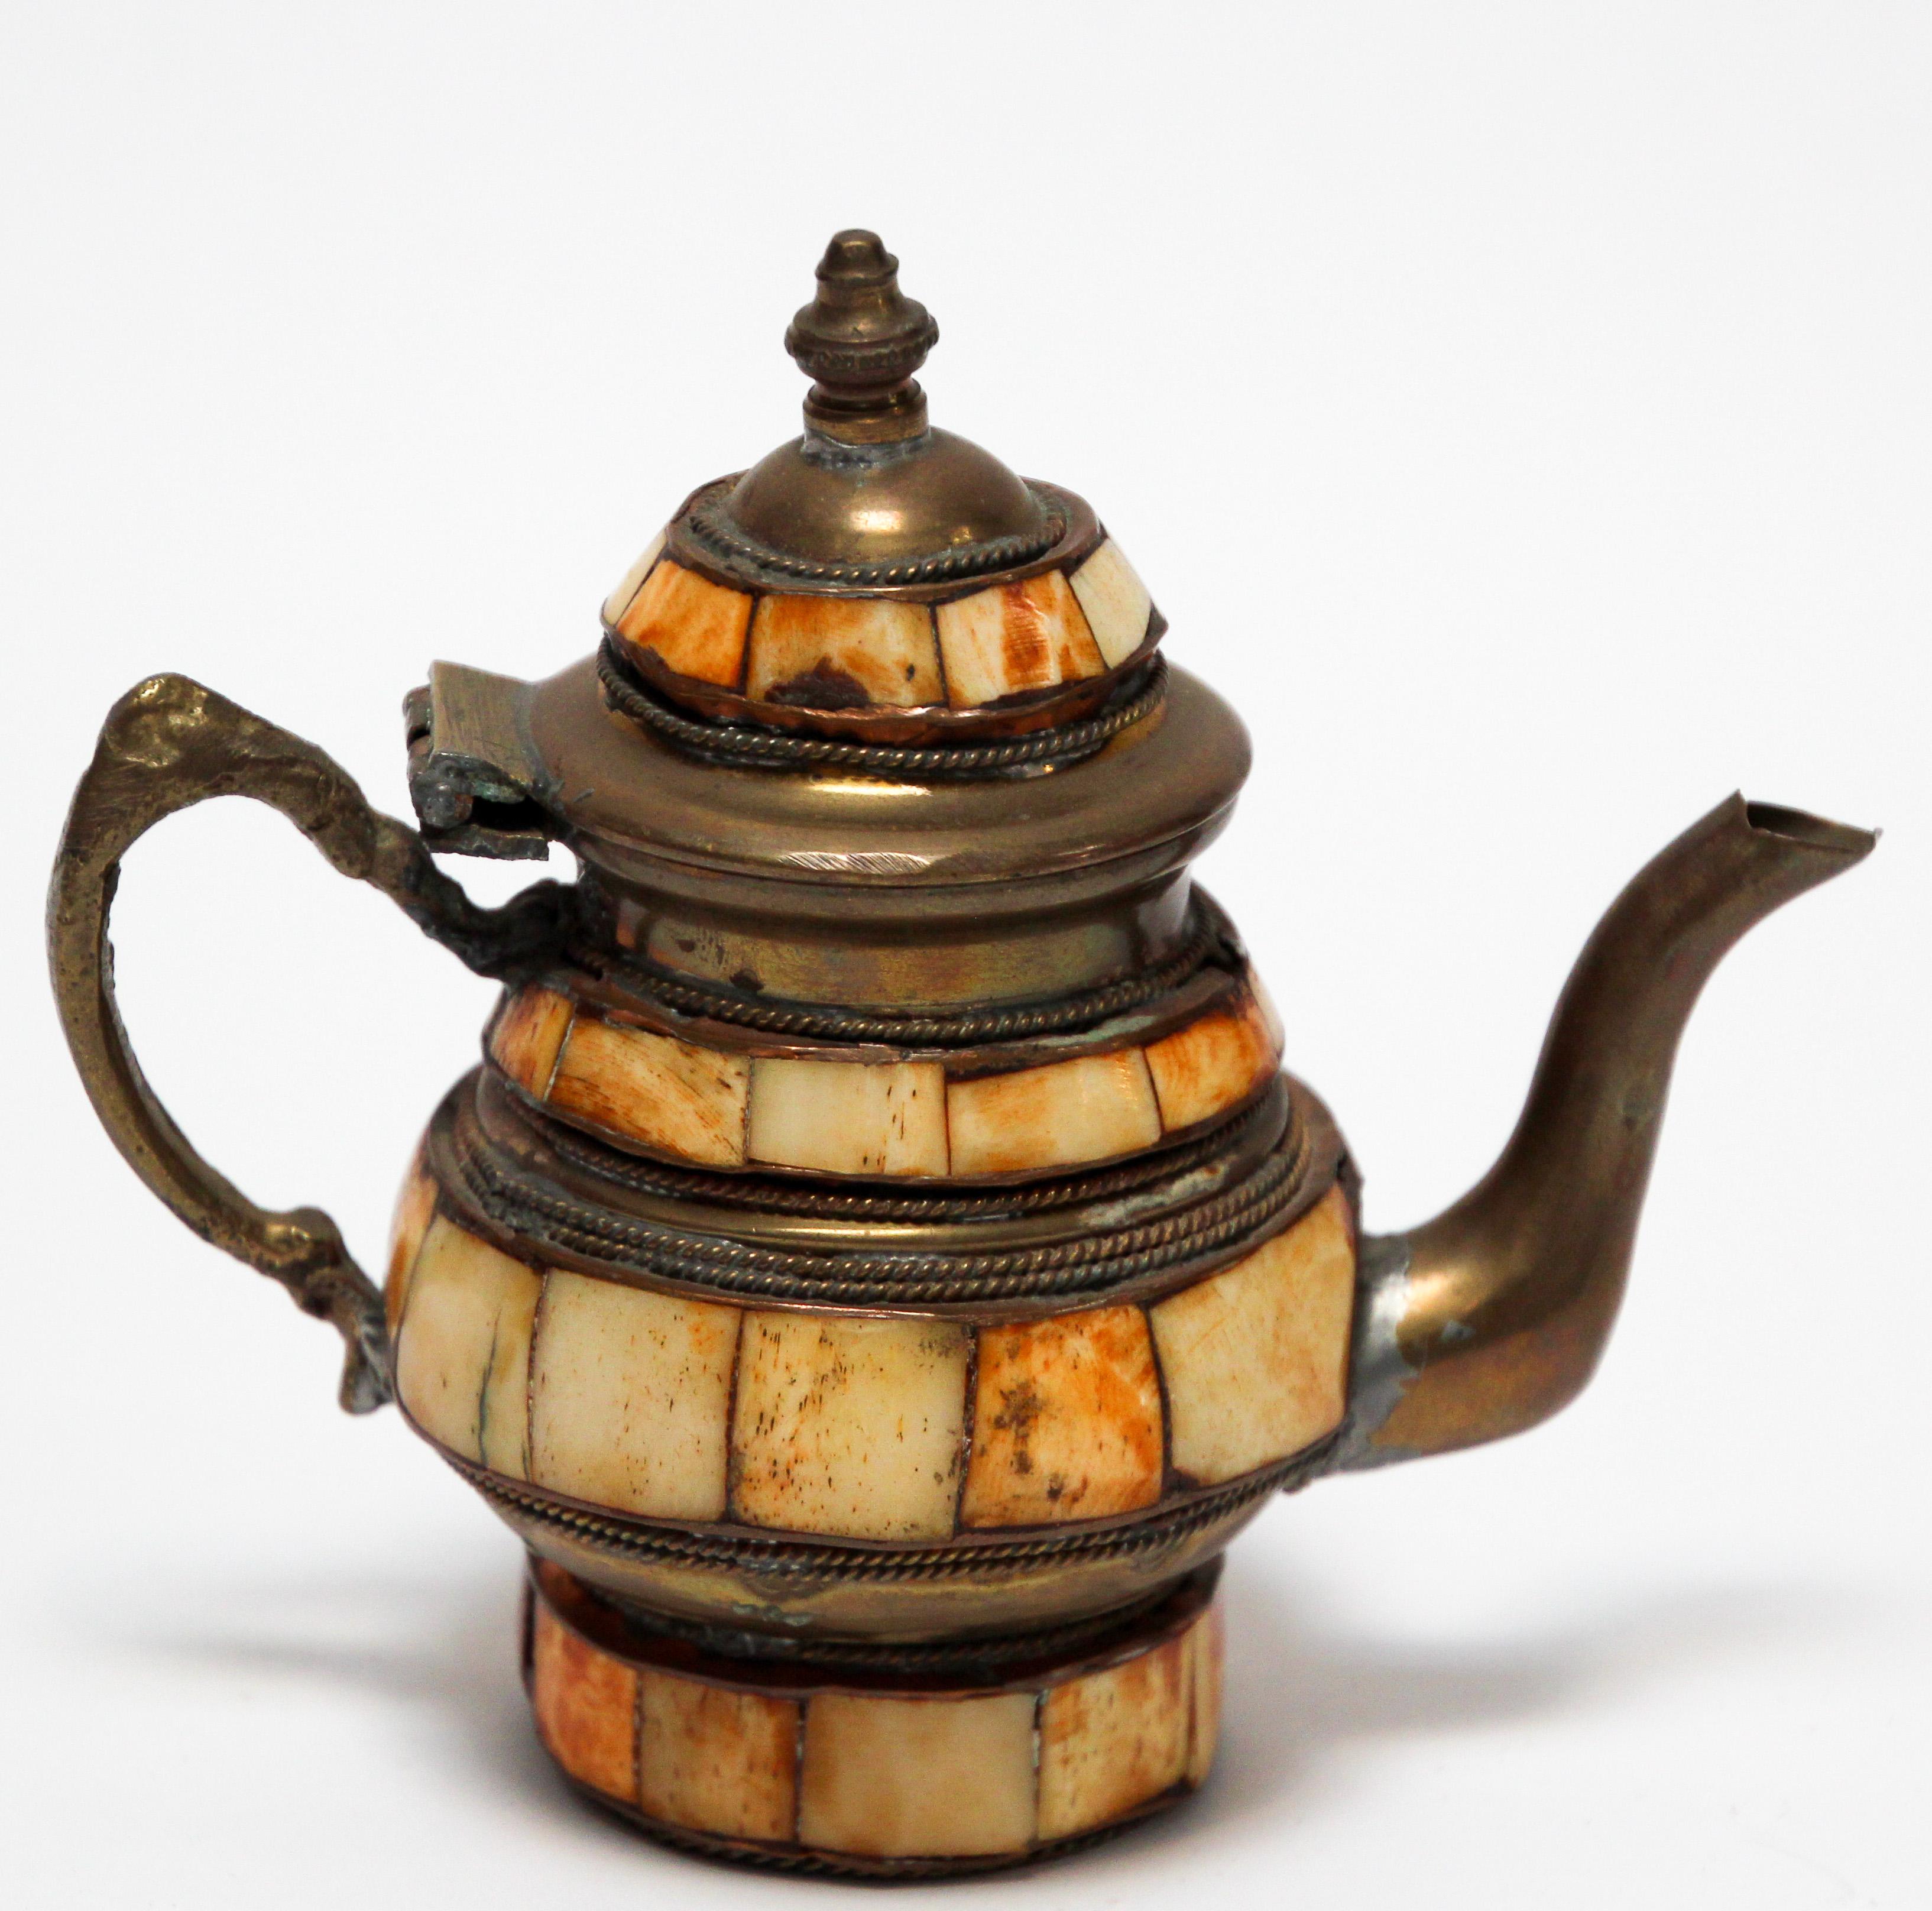 Traditional vintage brass decorative Moroccan tea pot.
Decorative tea pot with traditional form overlaid with camel bone, handcrafted in Marrakech.
Great decorative Moroccan Islamic art object.
Will make a great gift.
For decoration only.